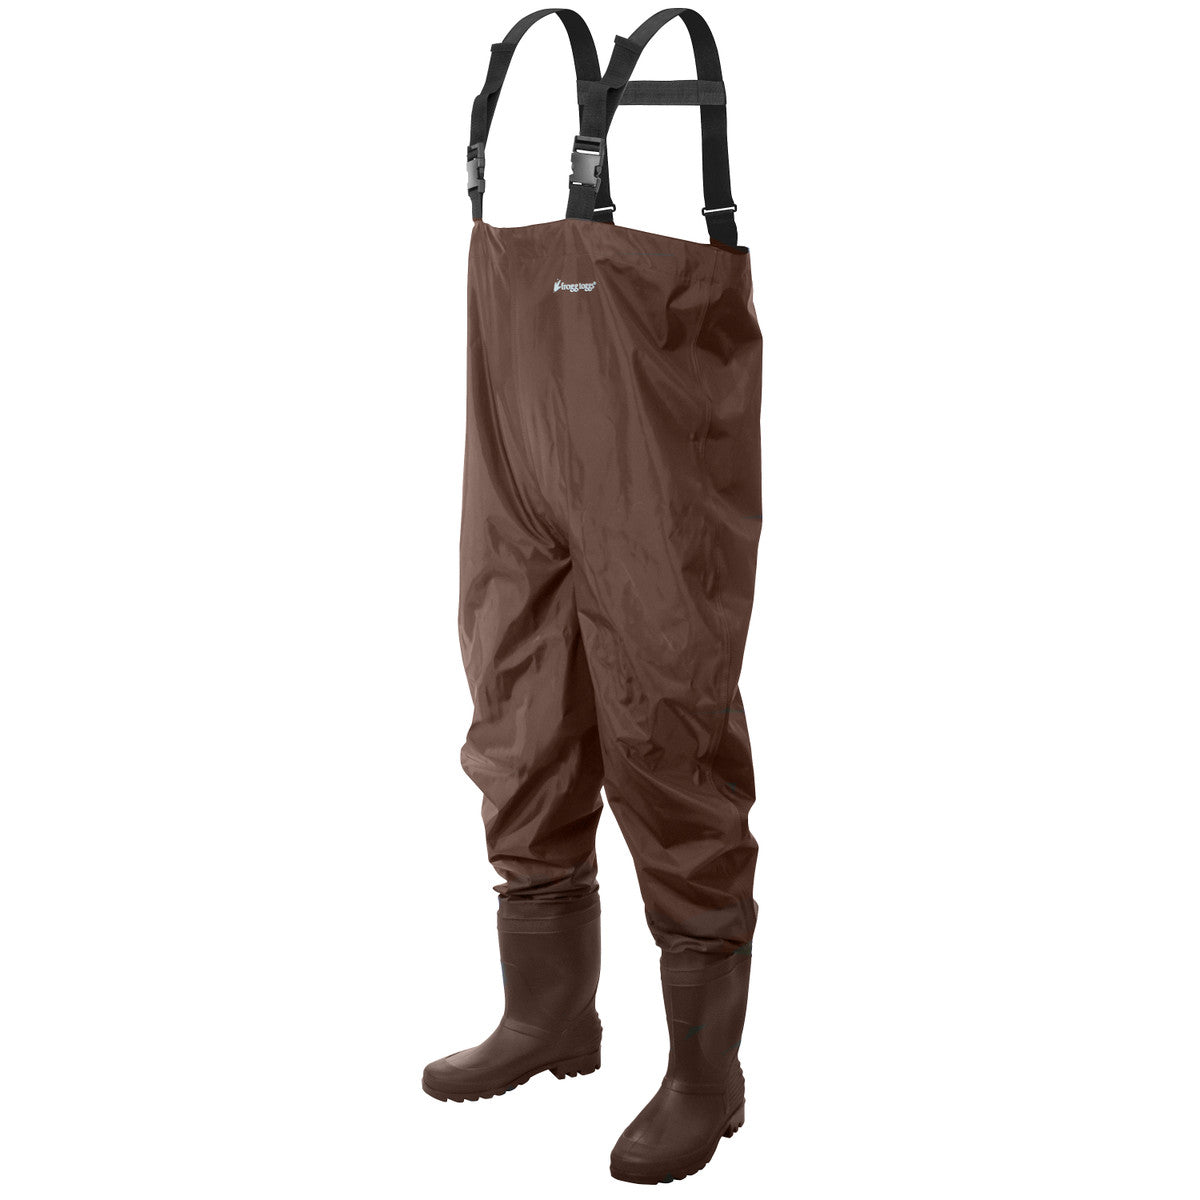 Frogg Toggs - Rana PVC Lug Sole Chest Wader